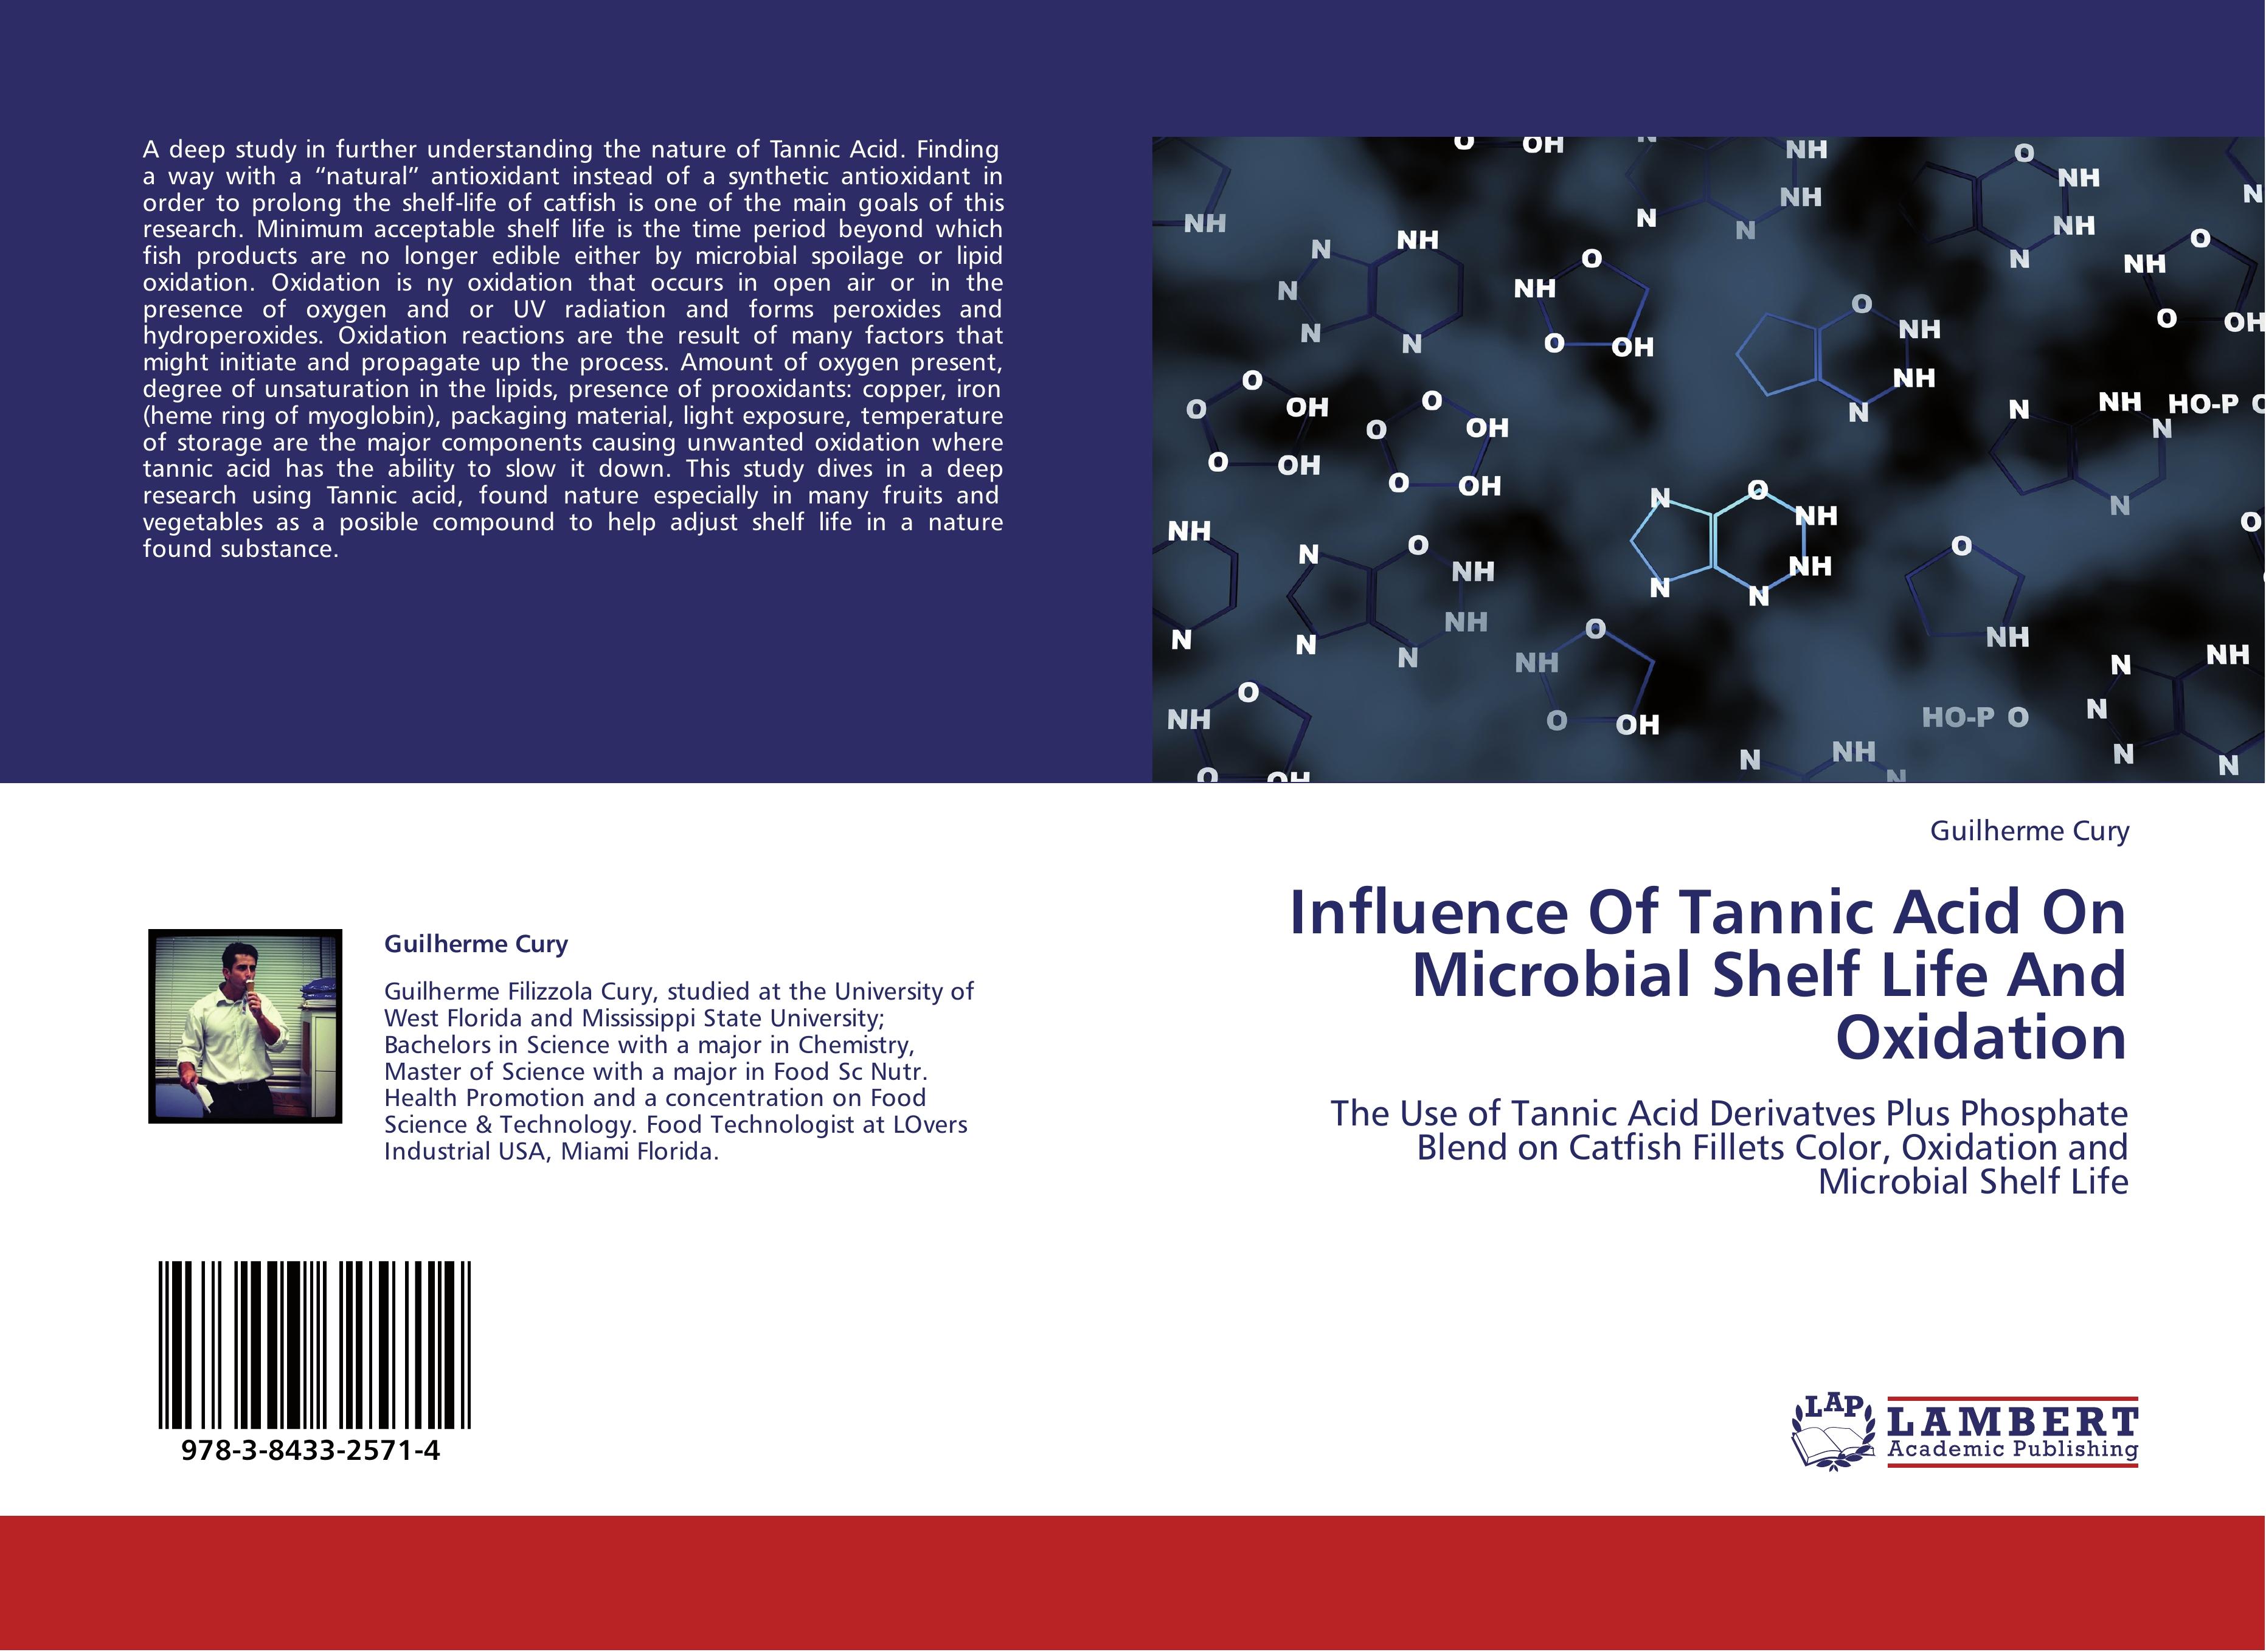 Influence Of Tannic Acid On Microbial Shelf Life And Oxidation - Guilherme Cury